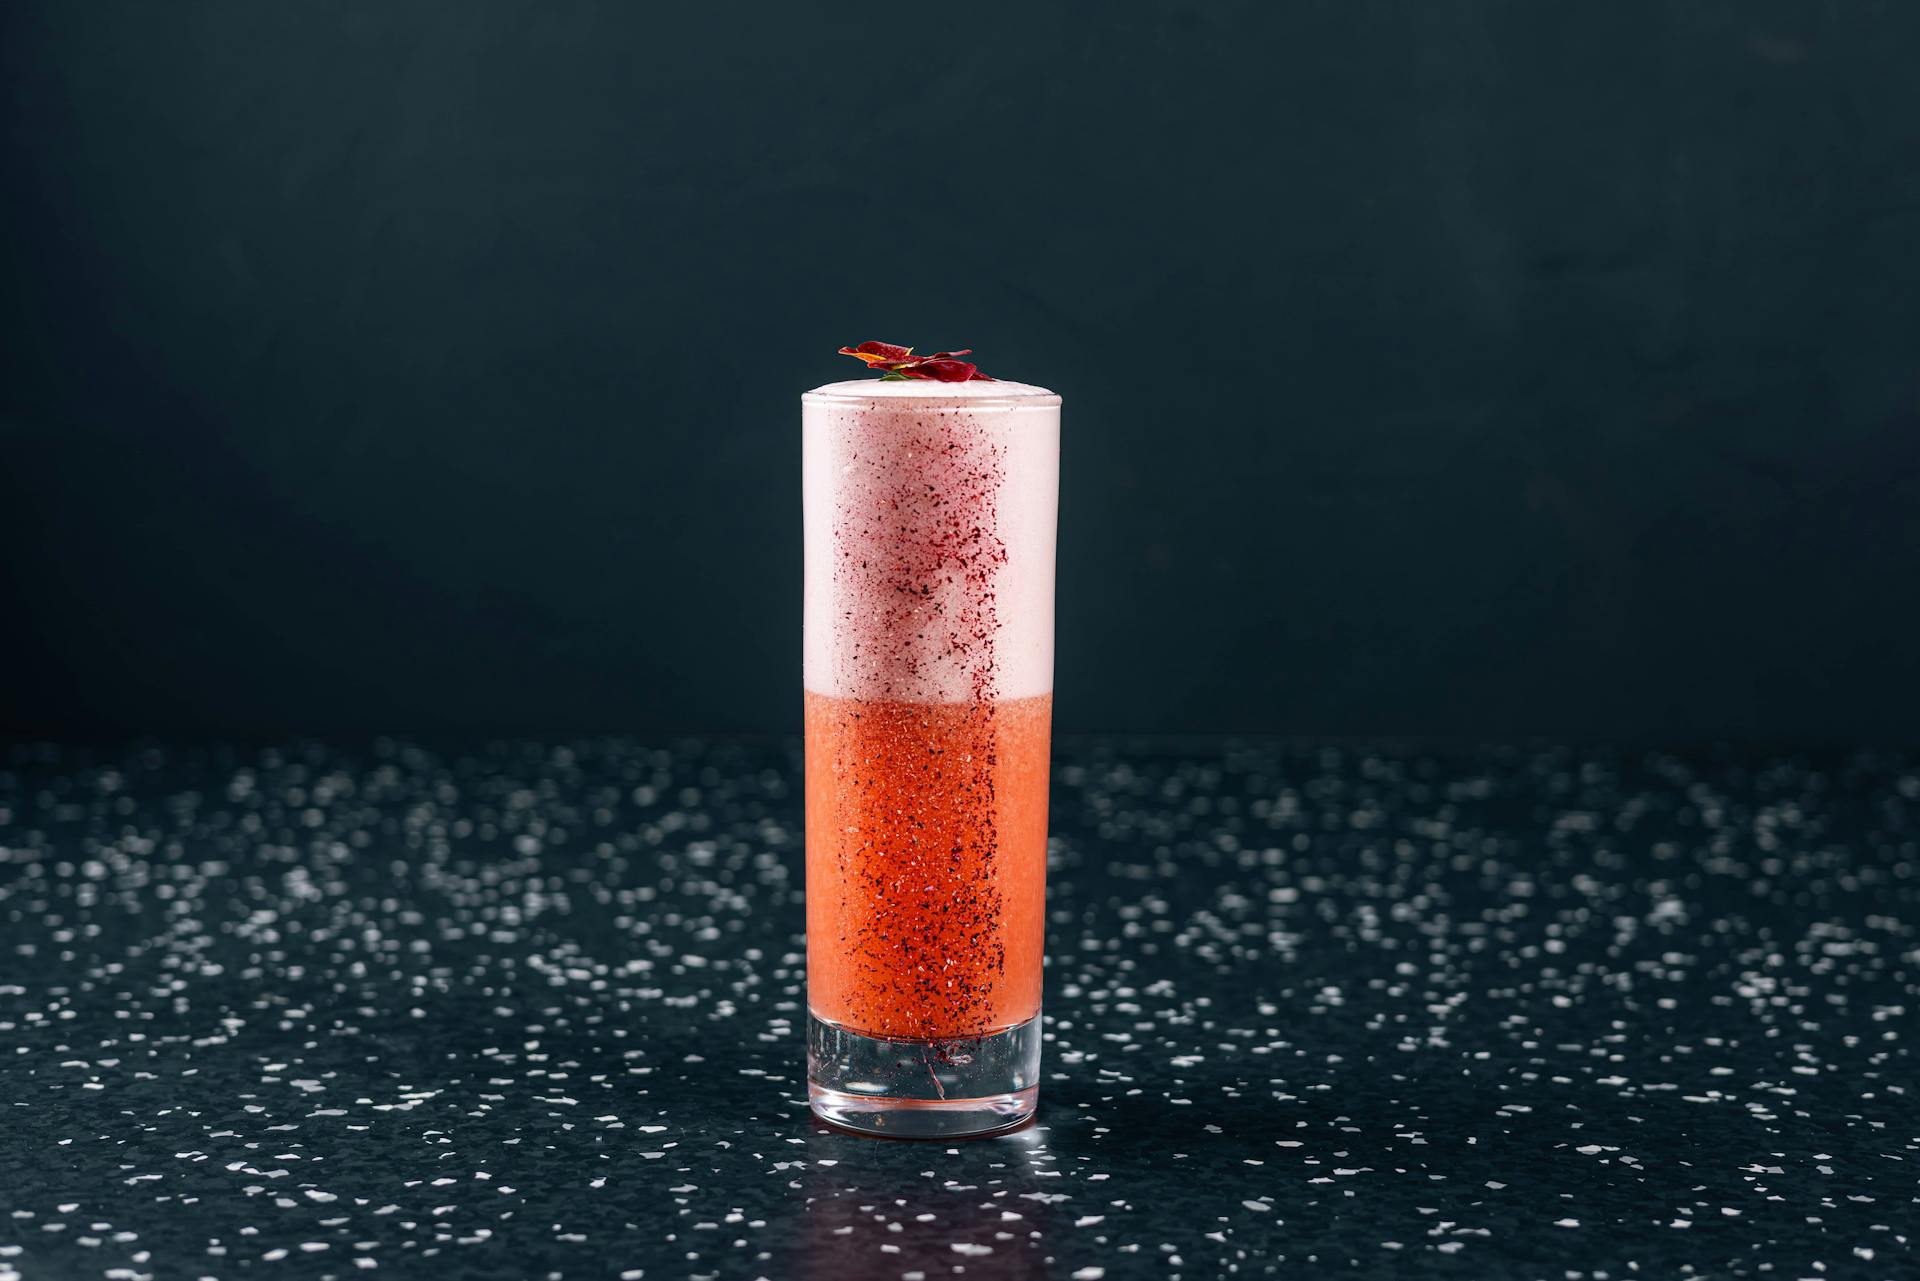 <p>Ever wanted to drink a garden?</p>
<p>Base: Aperol, lime juice, homemade rhubarb and strawberry pur&eacute;e and hibiscus&nbsp;</p>